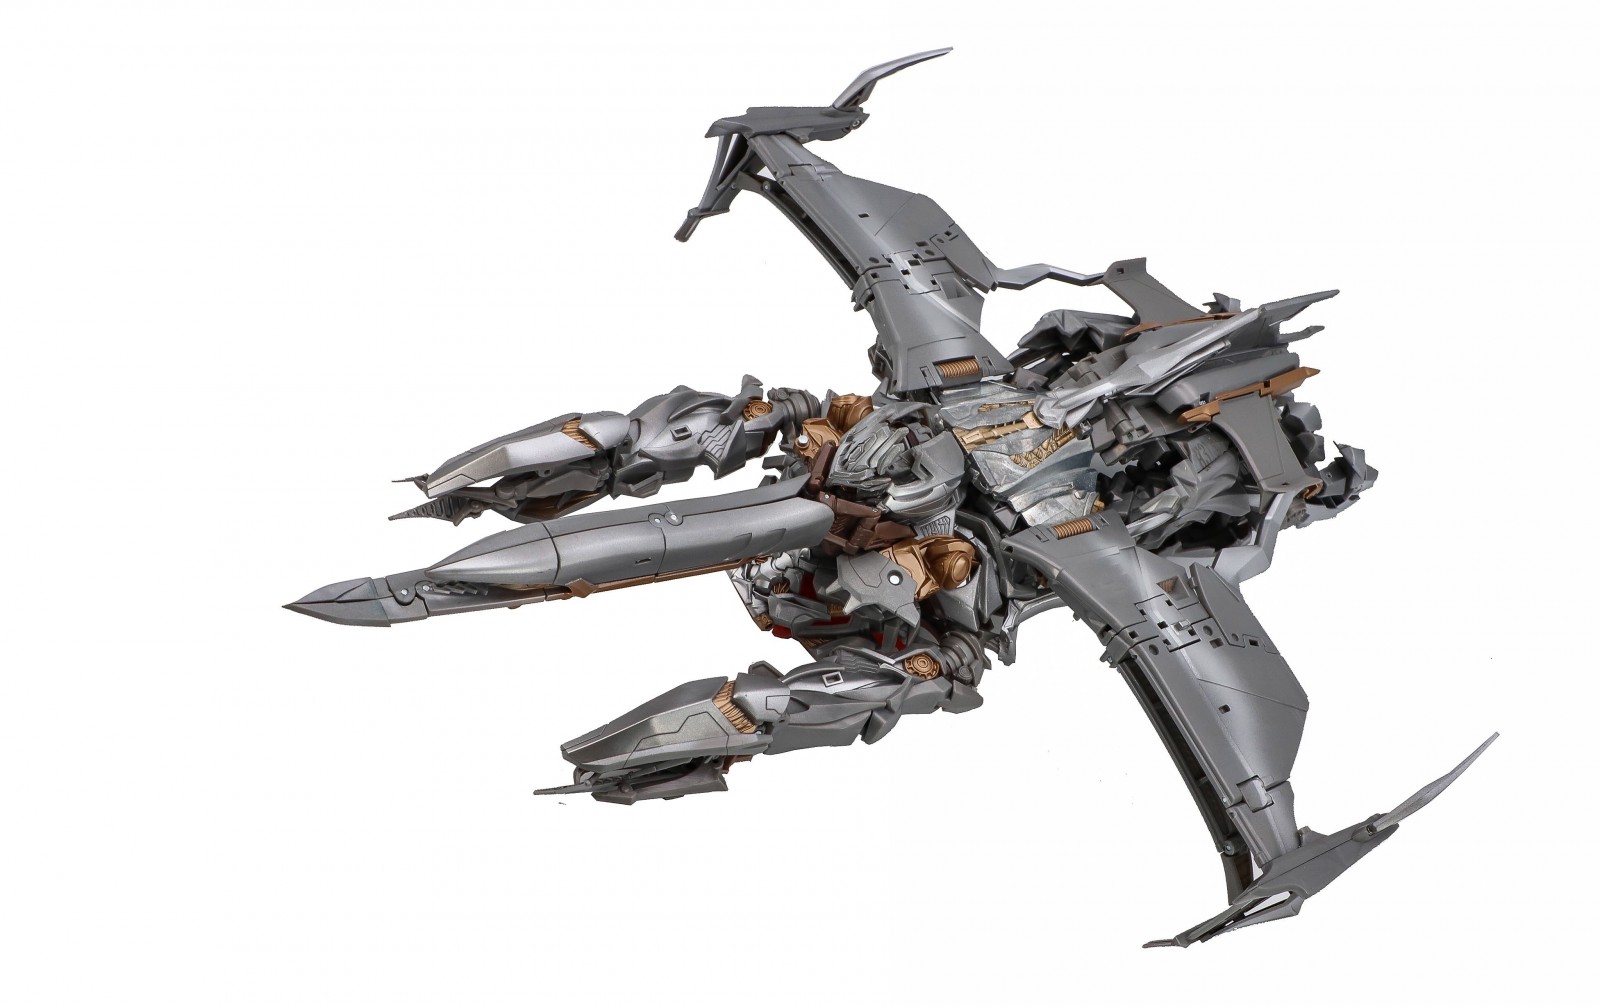 Transformers News: MPM Megatron and Jazz stock photos, prices, and release dates announced